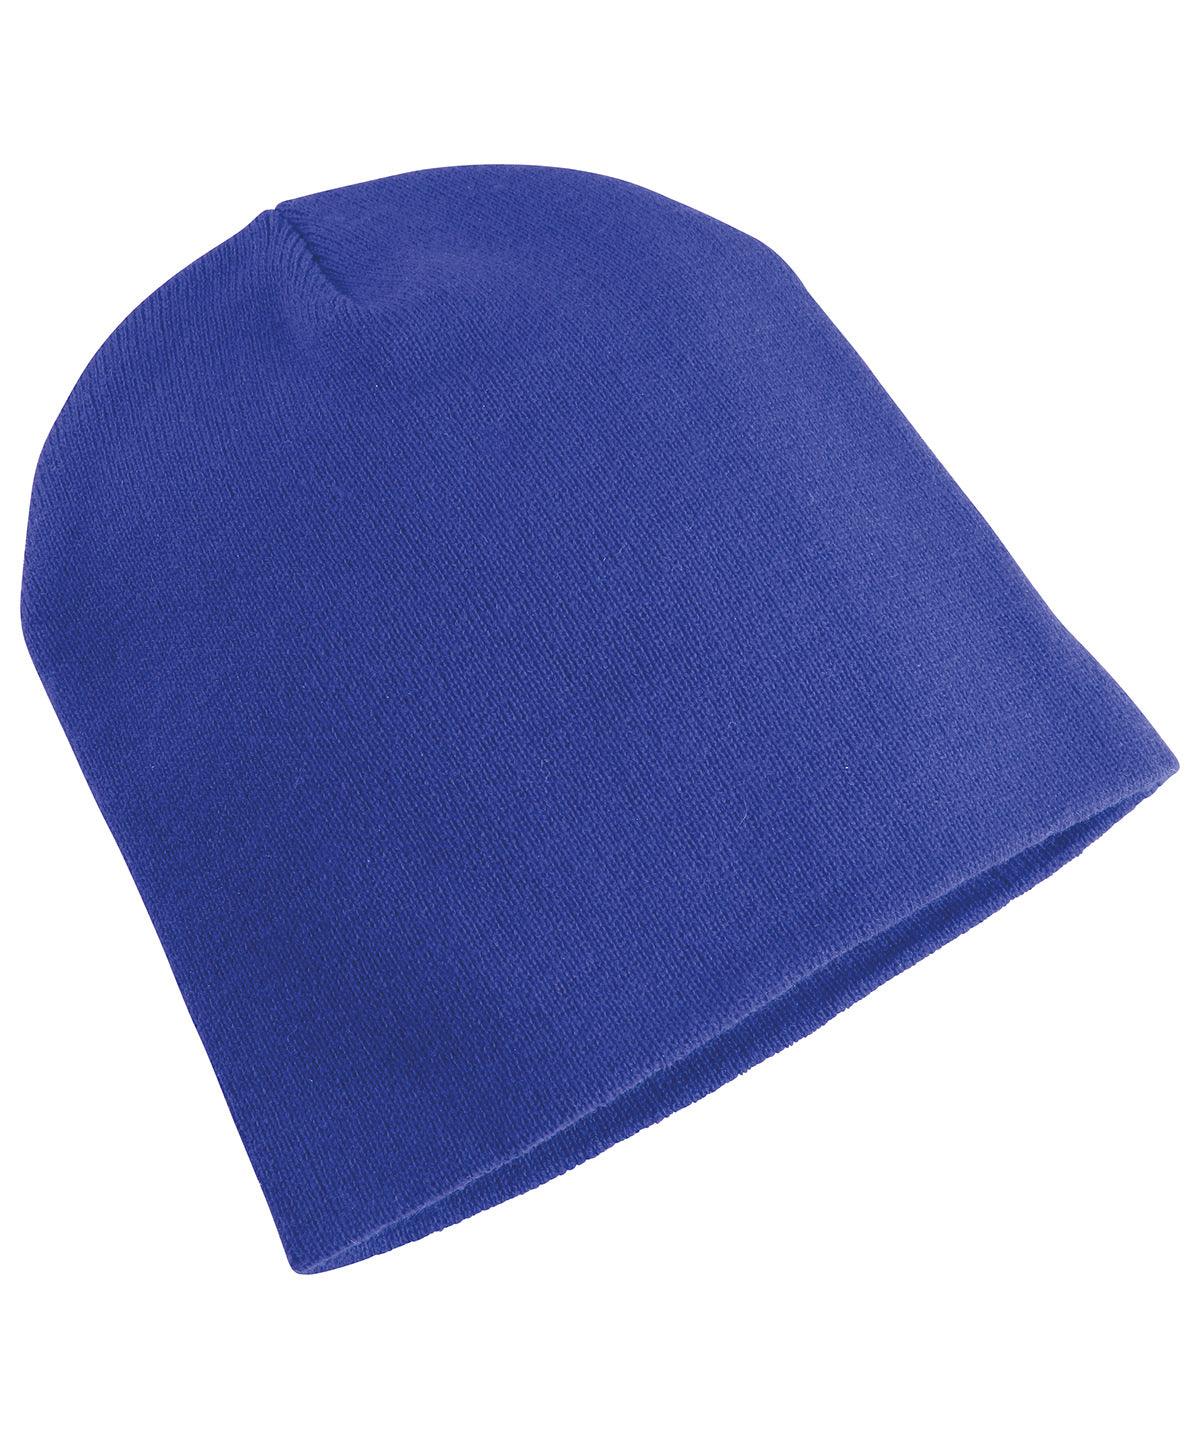 Royal - Heavyweight beanie (1500KC) Hats Flexfit by Yupoong Headwear, New Colours for 2023, Winter Essentials Schoolwear Centres